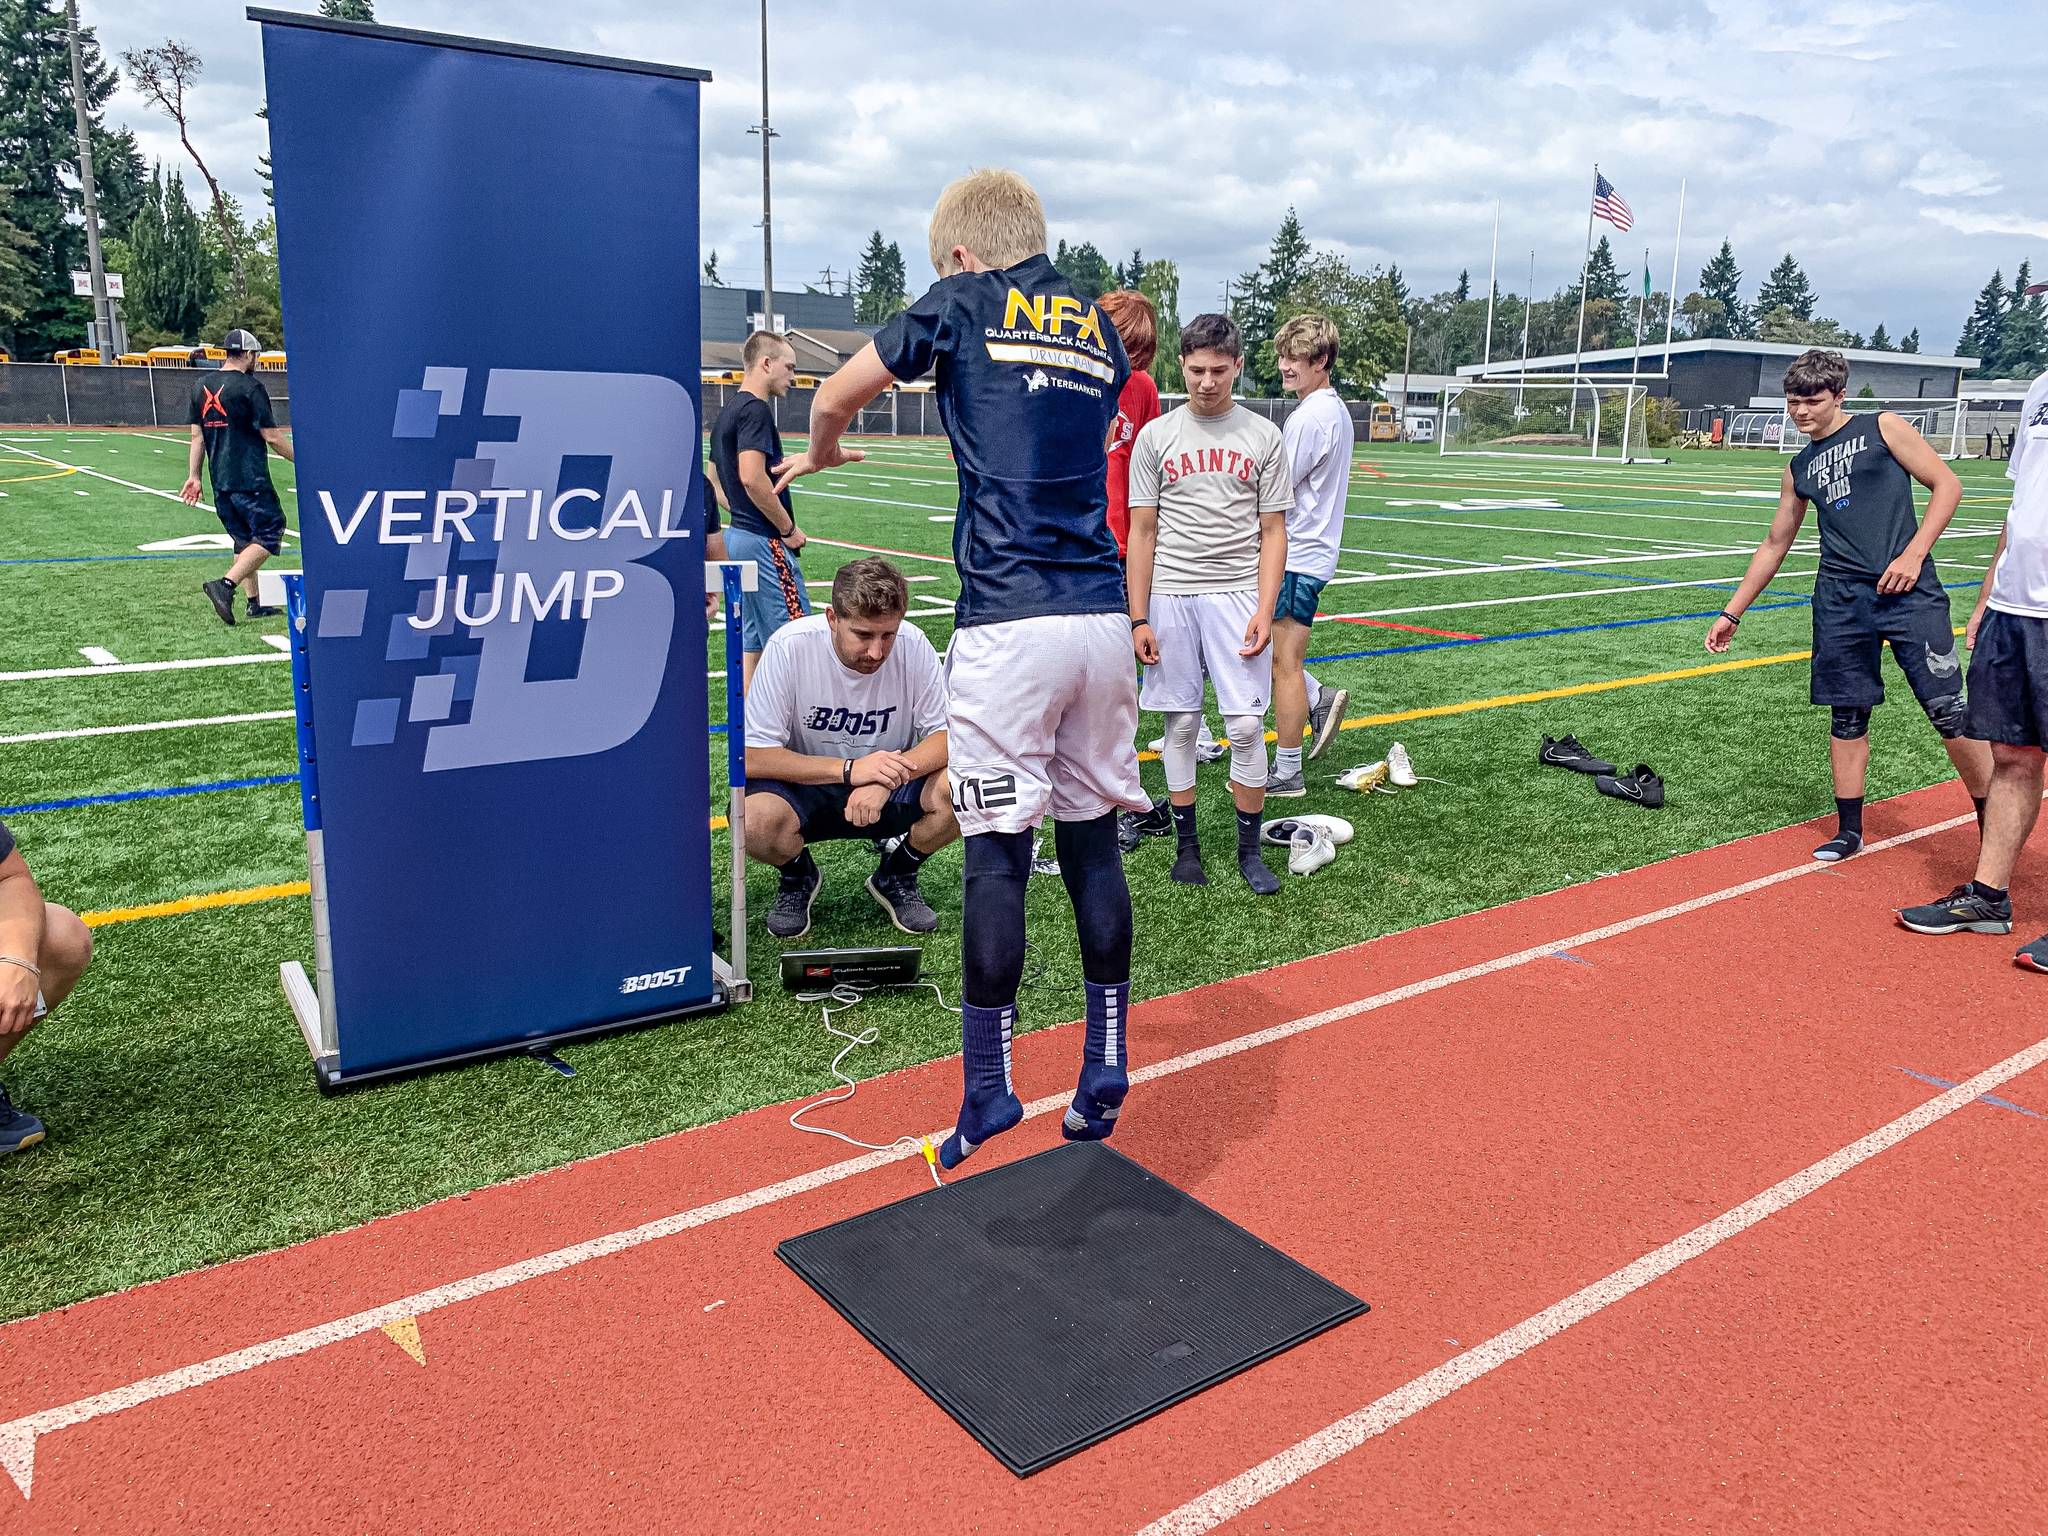 An athlete displays his jumping ability at an NFL-style combine on Aug. 17 at Mercer Island High. Photo courtesy of Zybek Sports